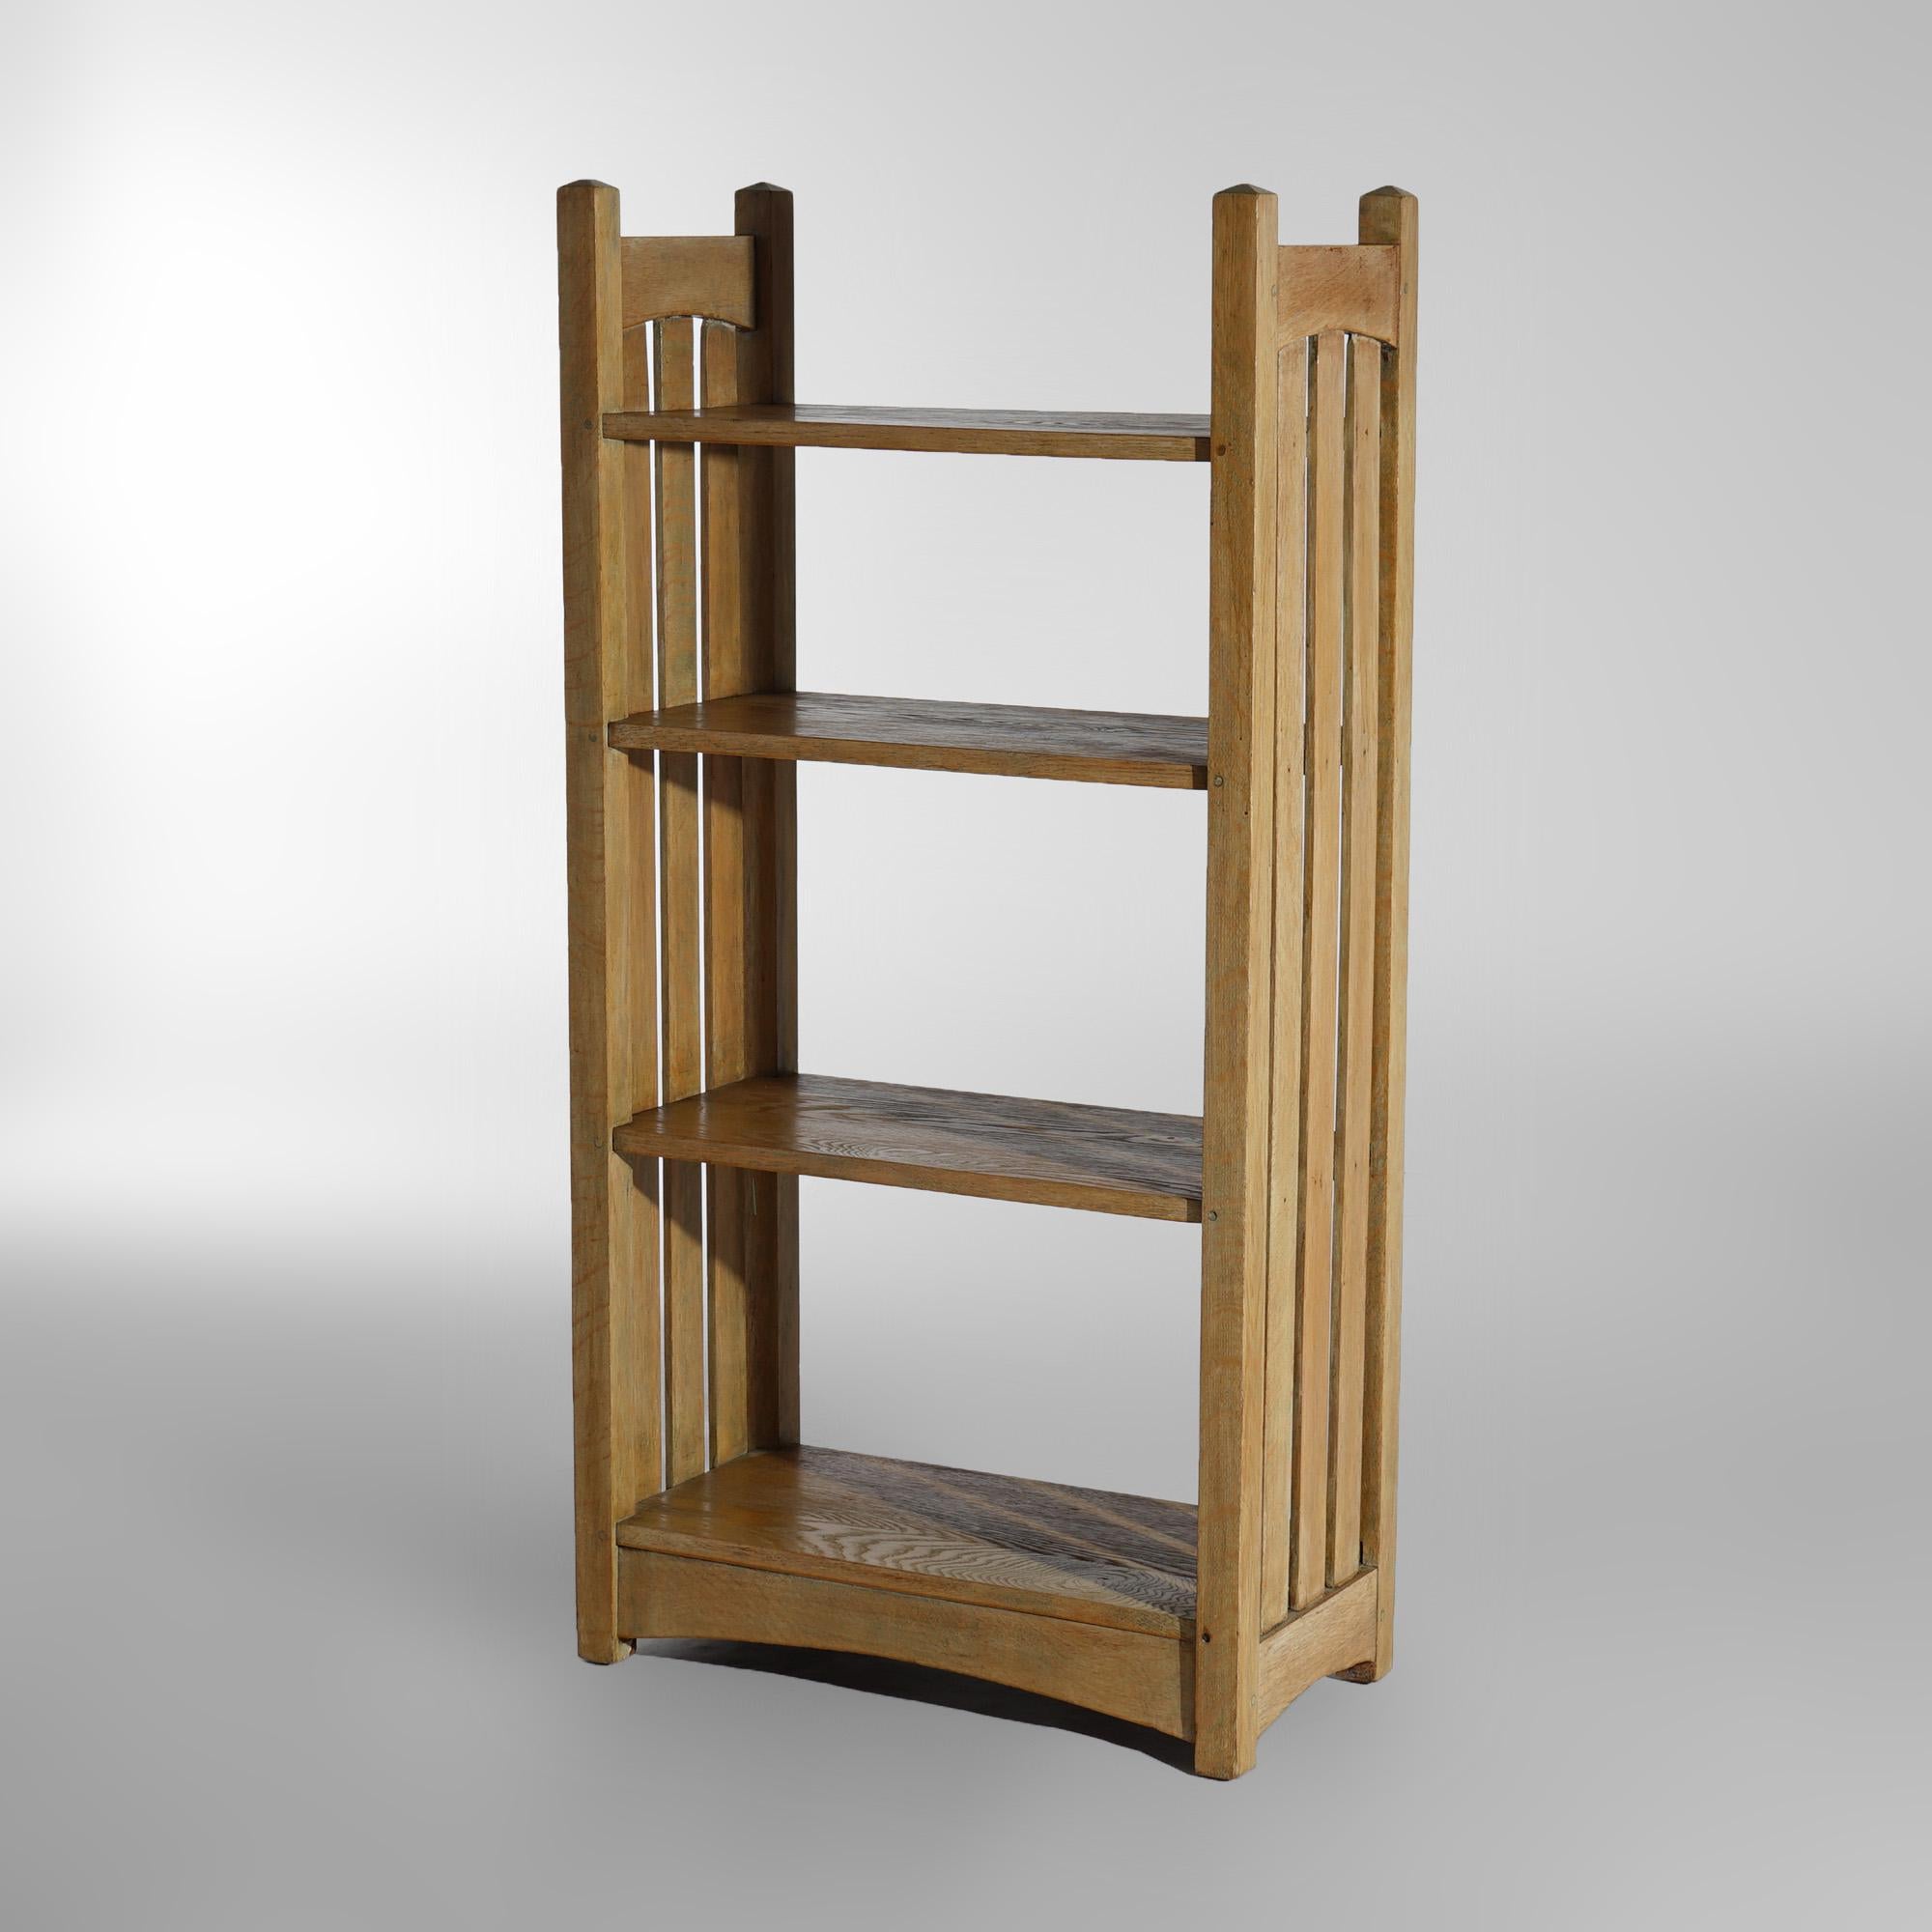 An Antique Arts & Crafts L & JG Stickley Oak Magazine Book Stand with Slatted Sides Circa 1910

Measures - 49